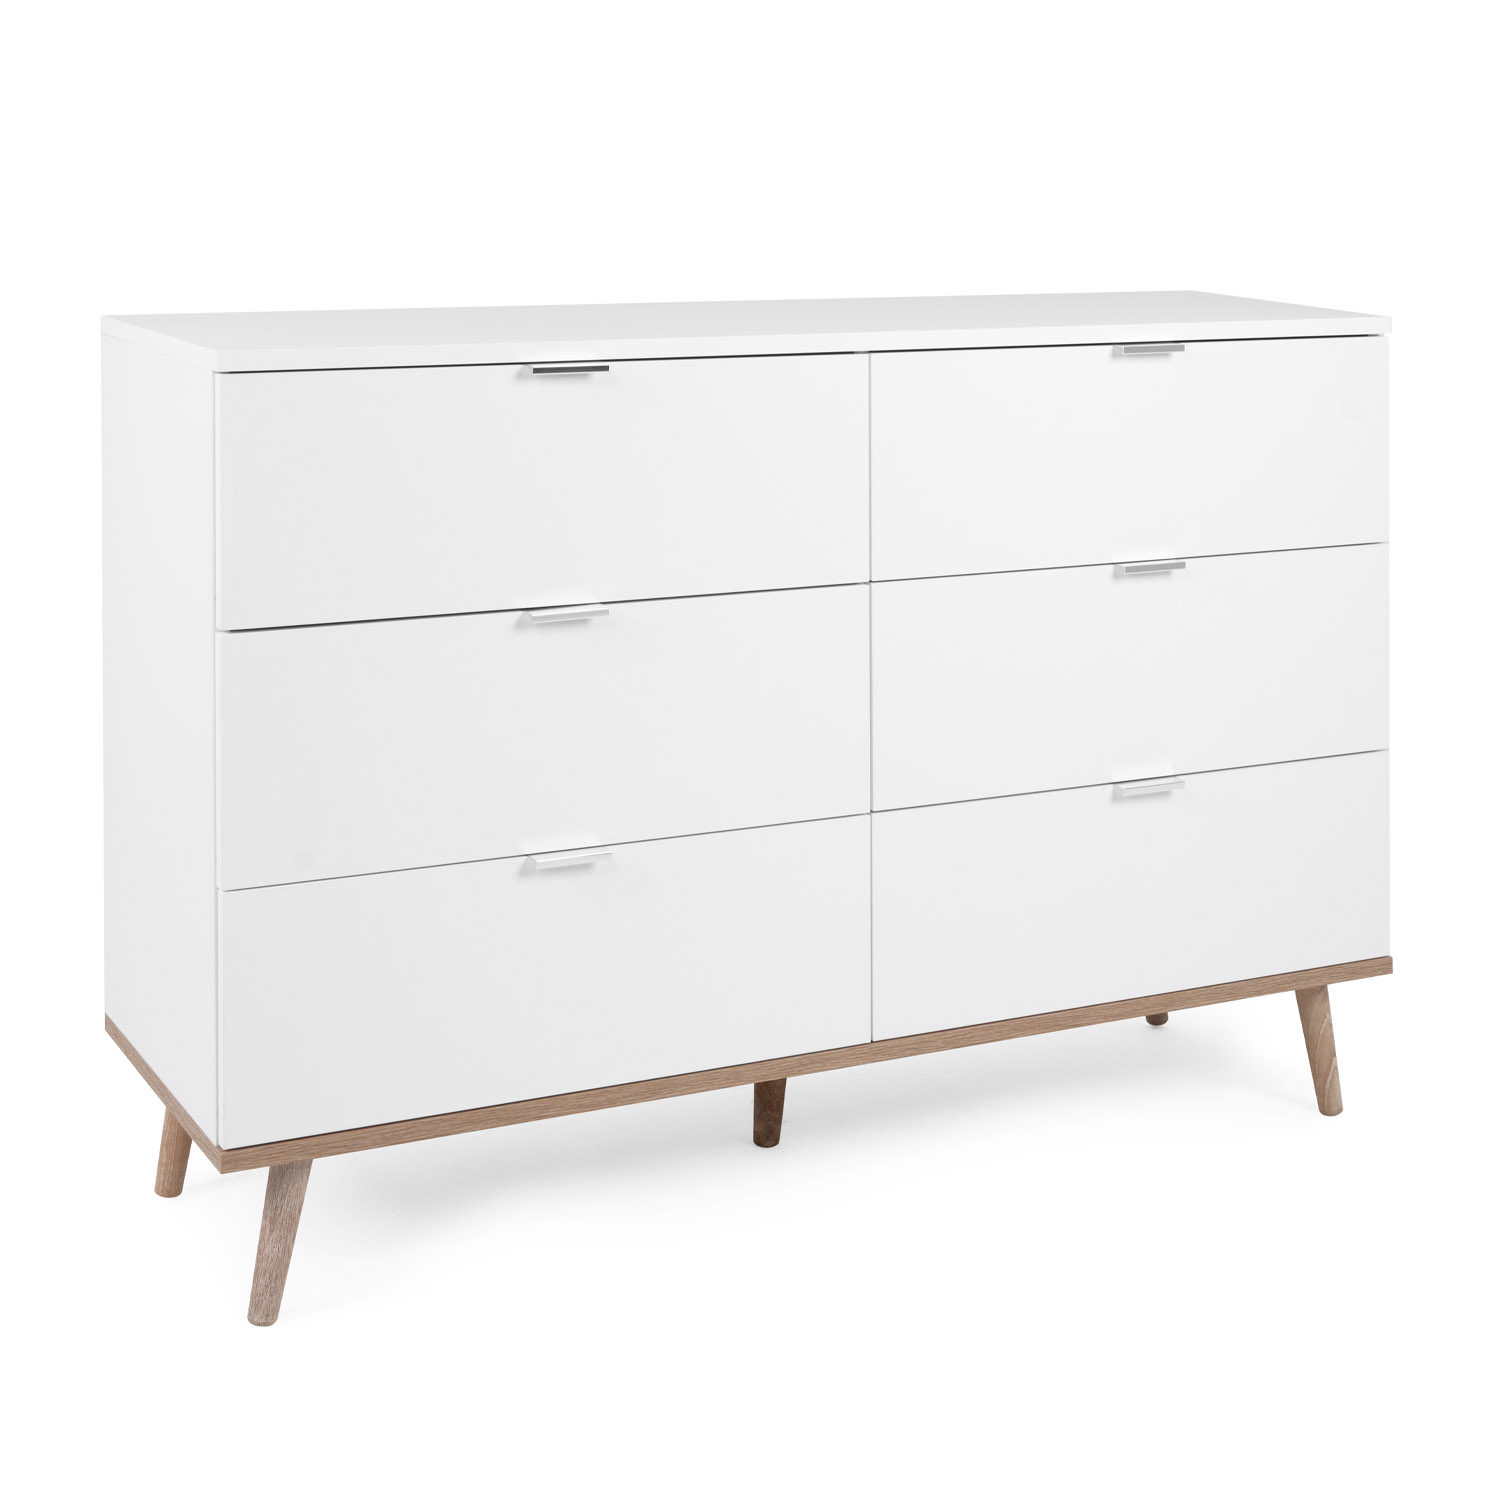 Chest of Drawers Sideboard White Wood Bedroom Wardrobe